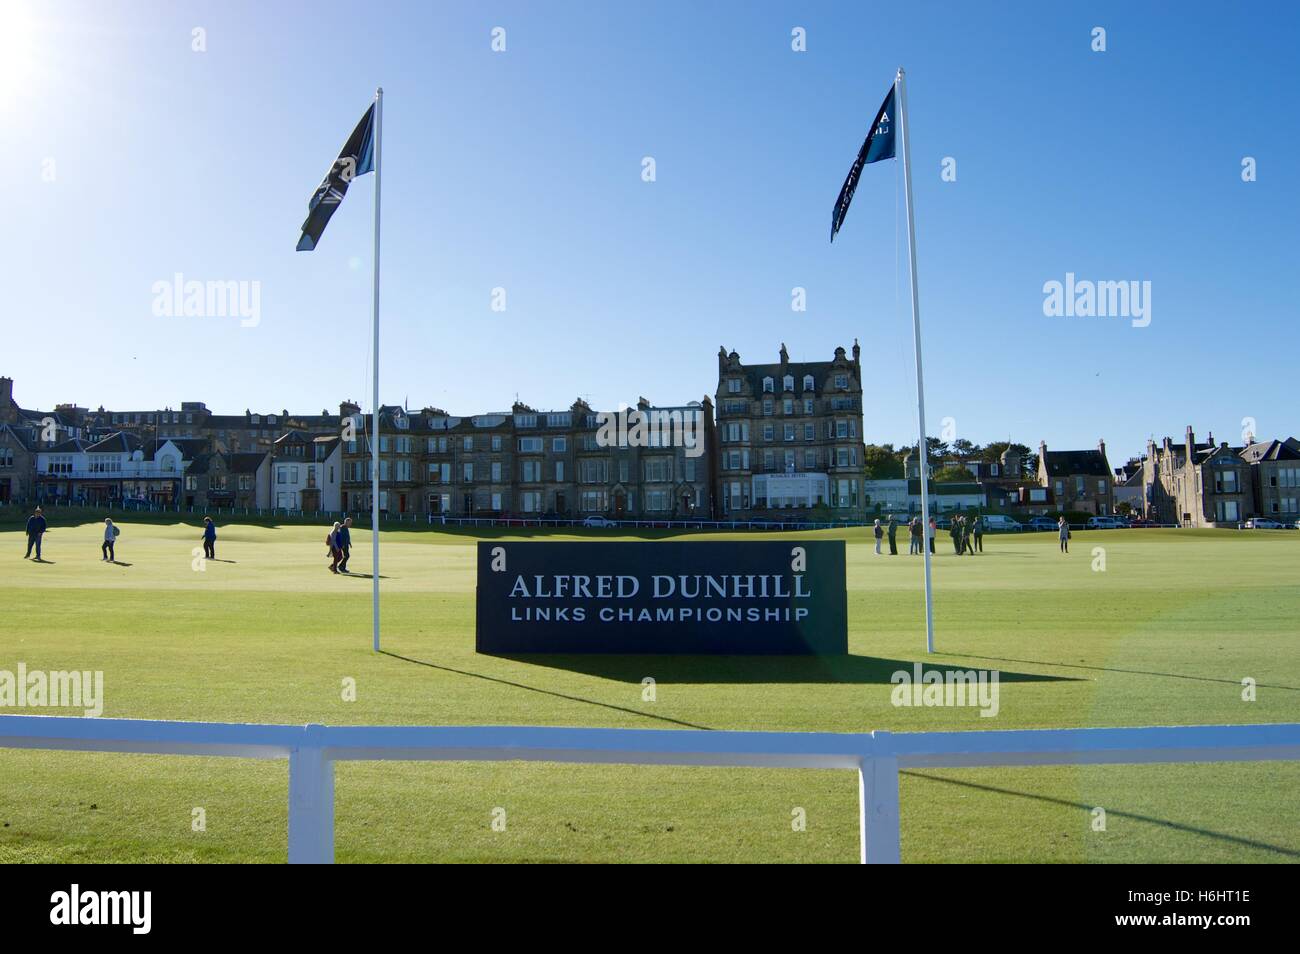 Alfred Dunhill Links Championship on the old golf course St Andrews Scotland Stock Photo